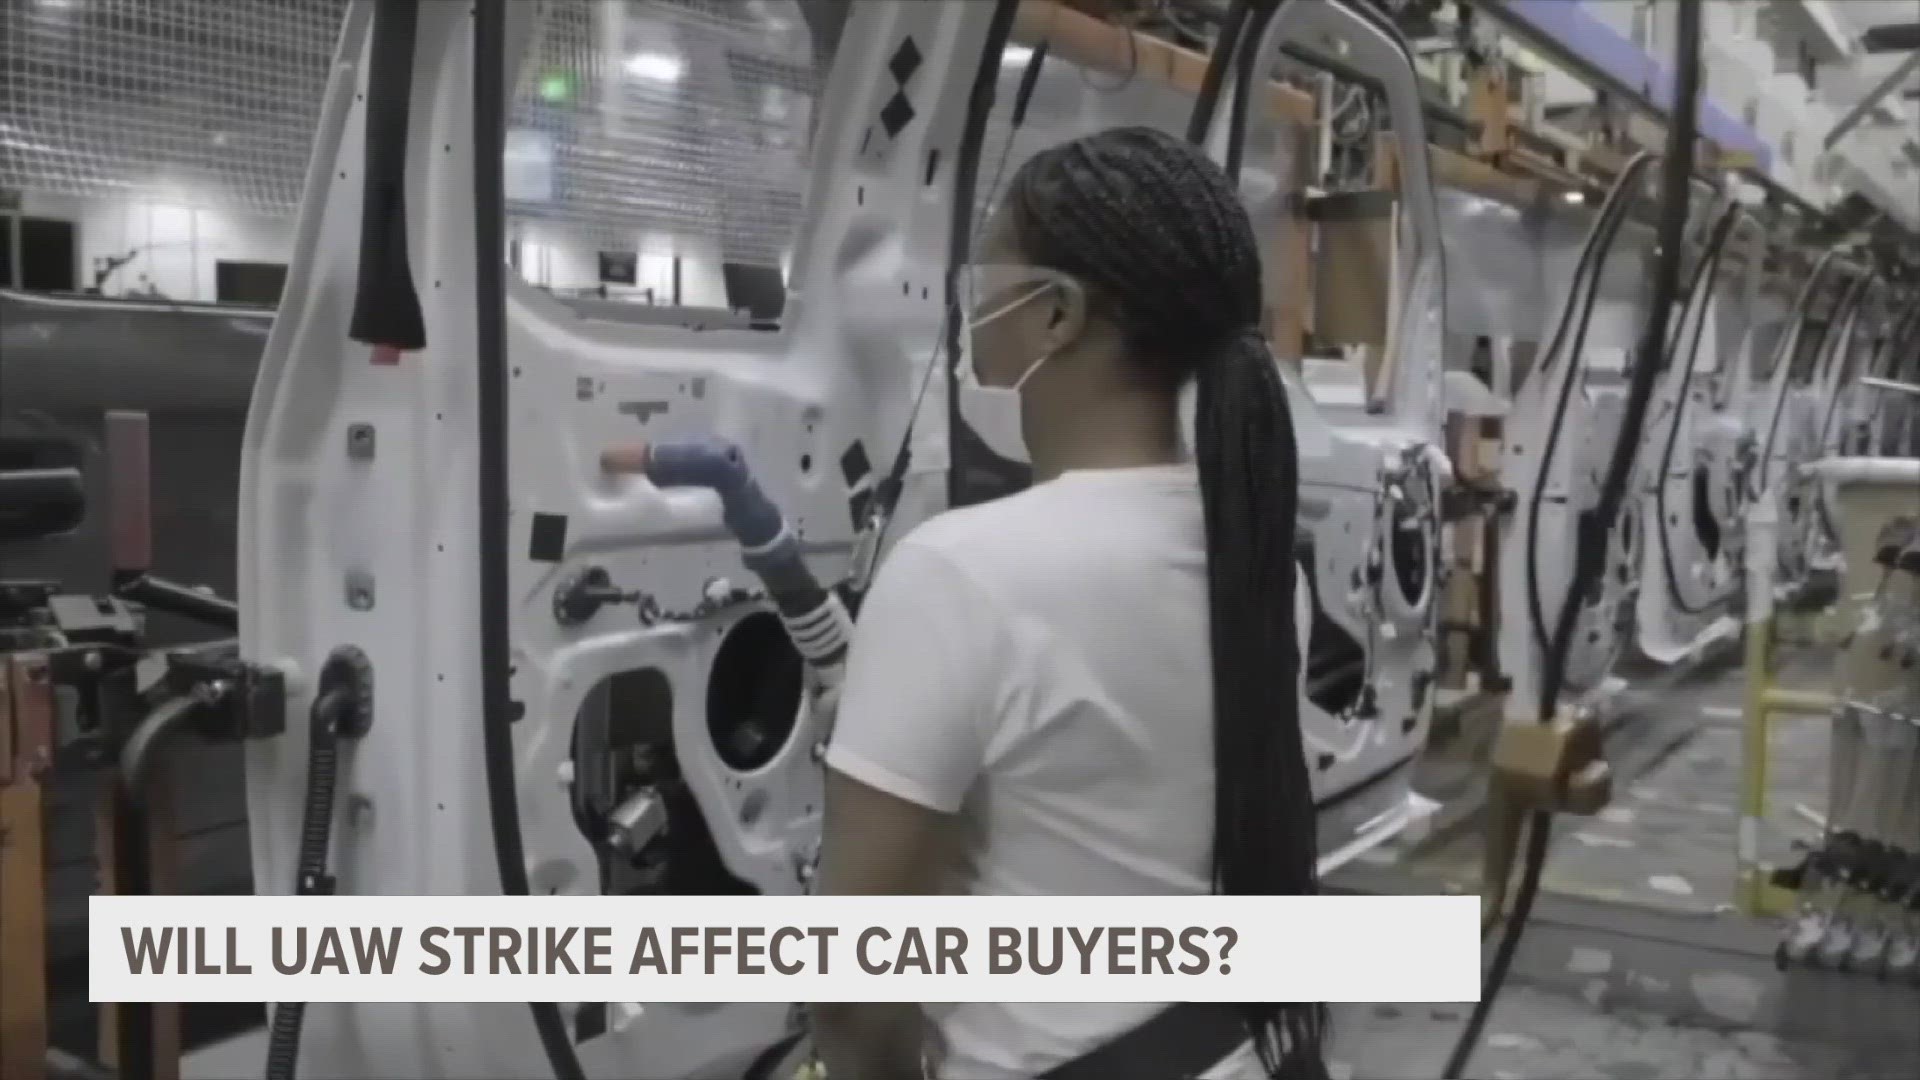 The strike comes as consumers have already been dealing with low inventory and high prices when buying a car.